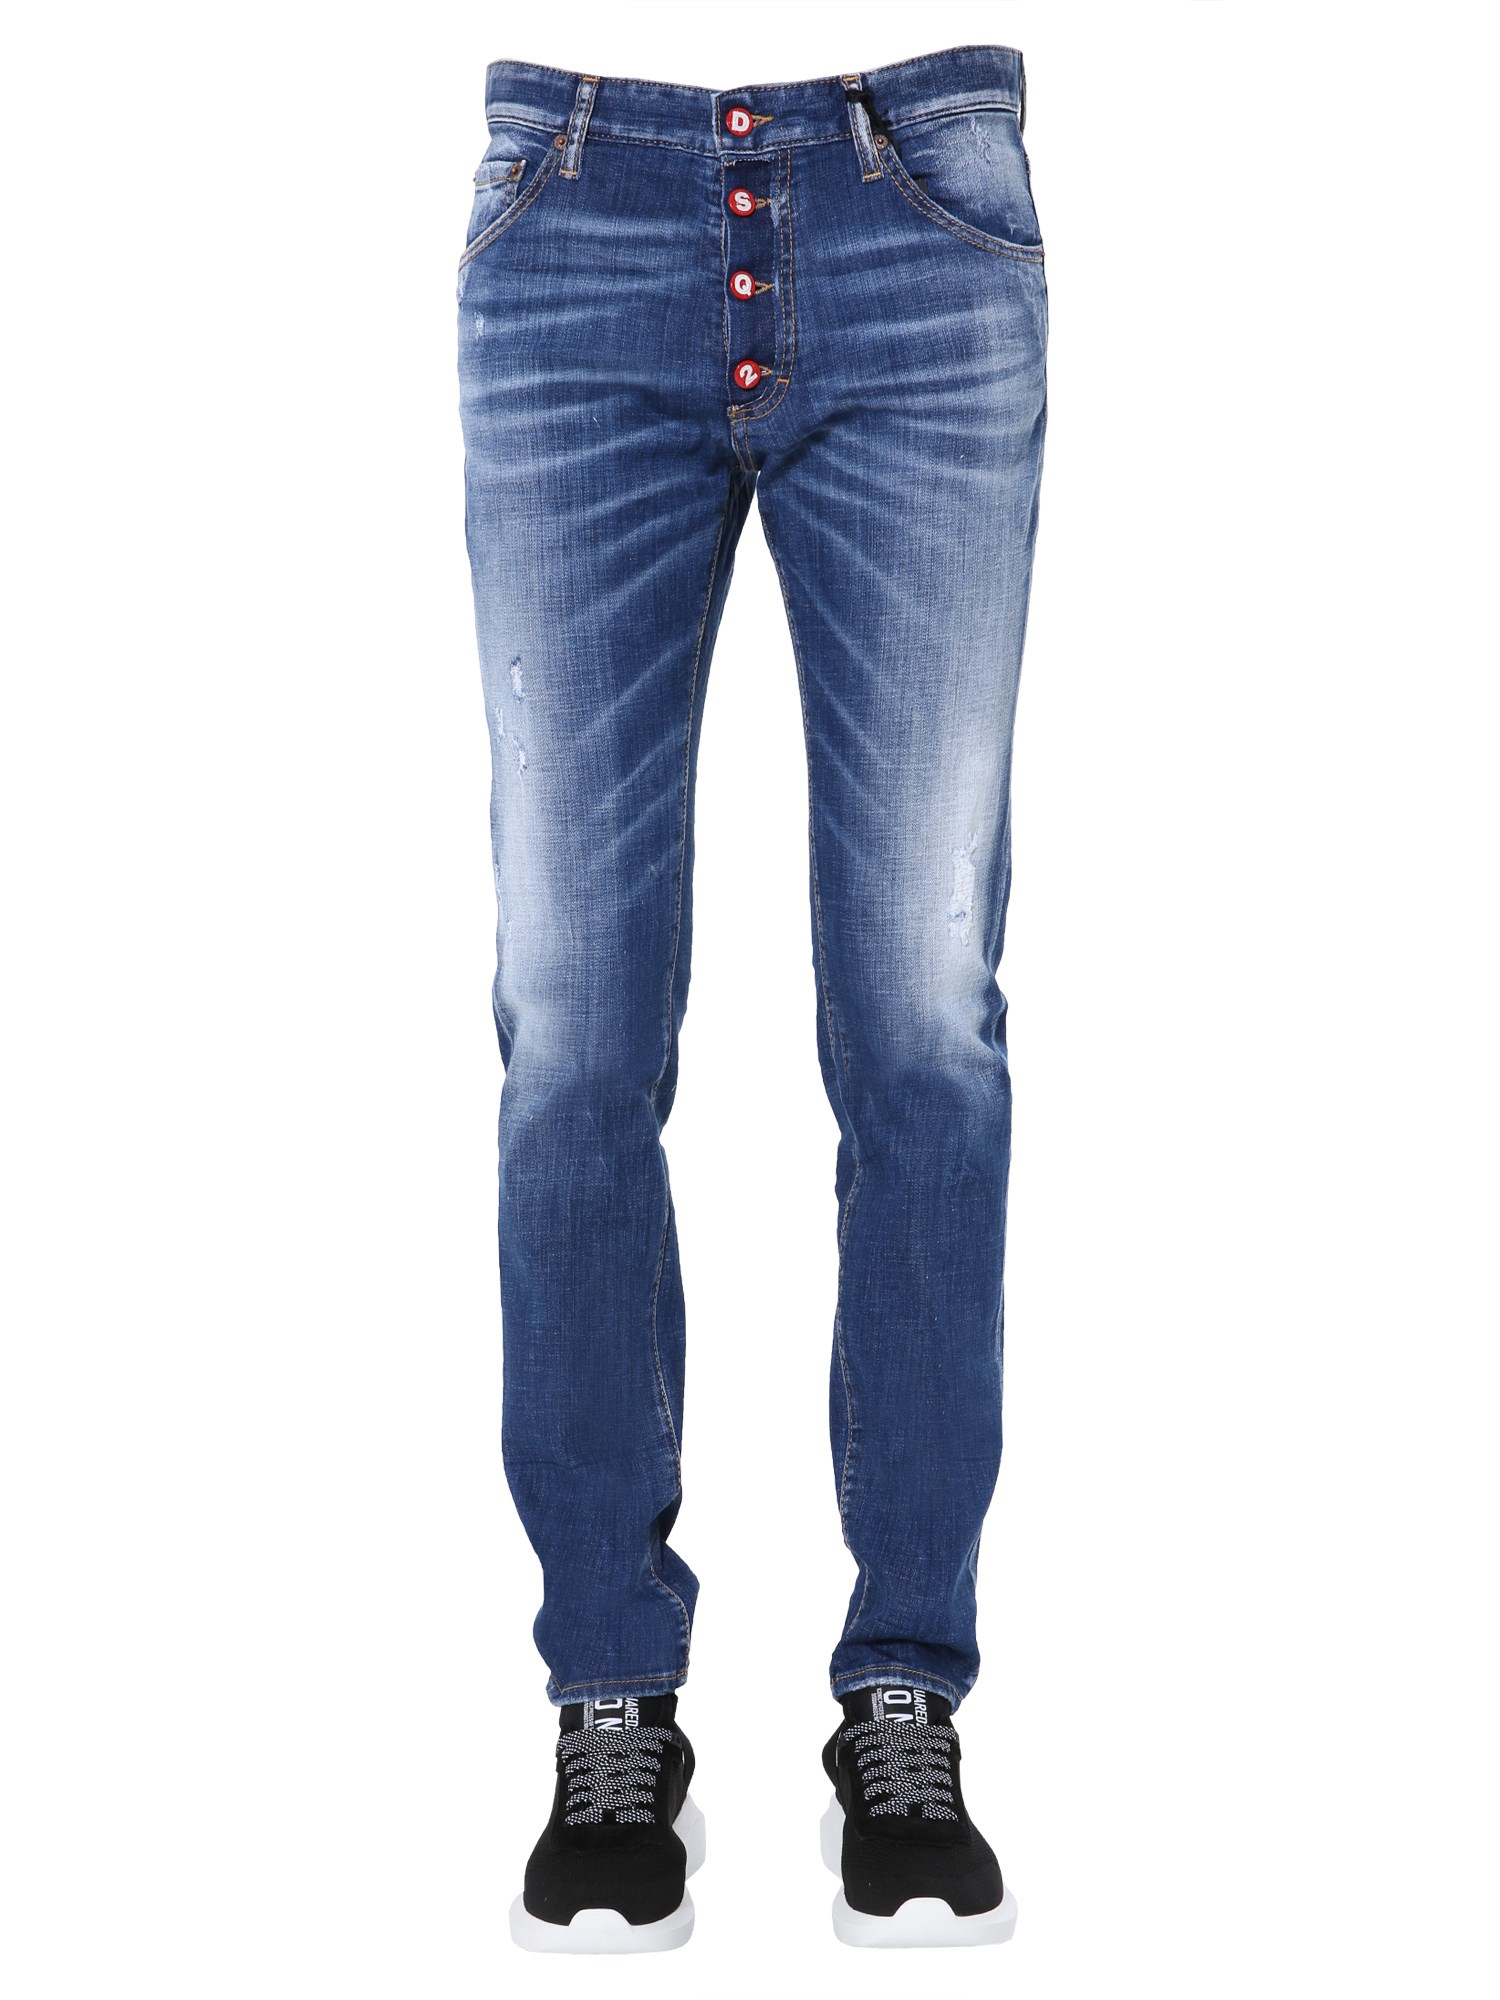 DSQUARED2 COOL GUY JEANS,173173